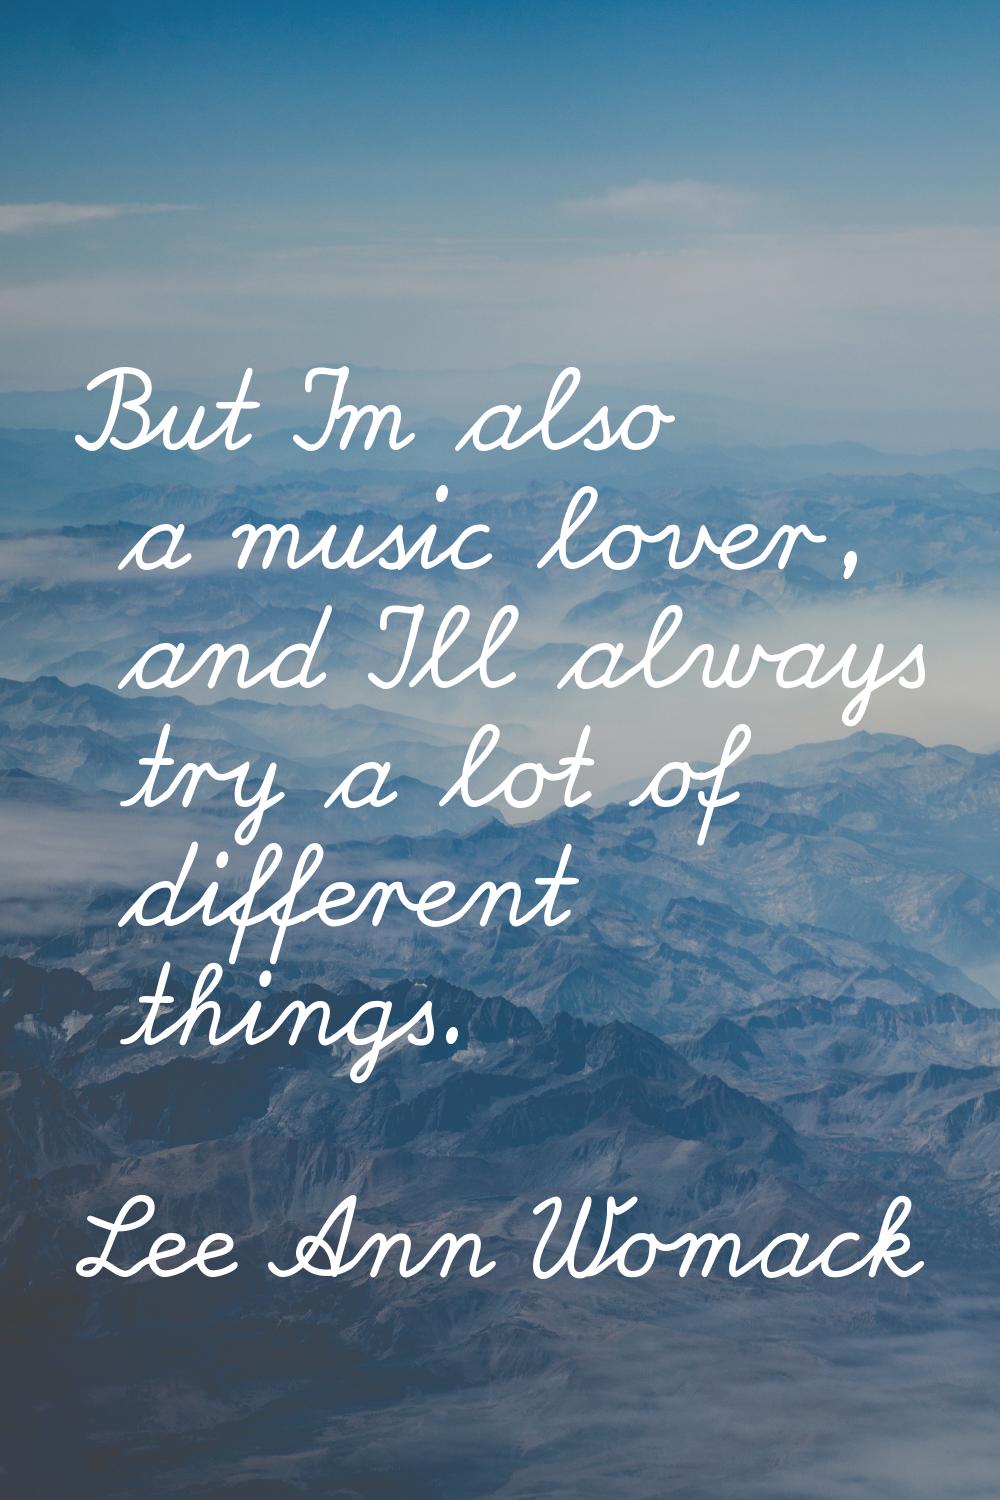 But I'm also a music lover, and I'll always try a lot of different things.